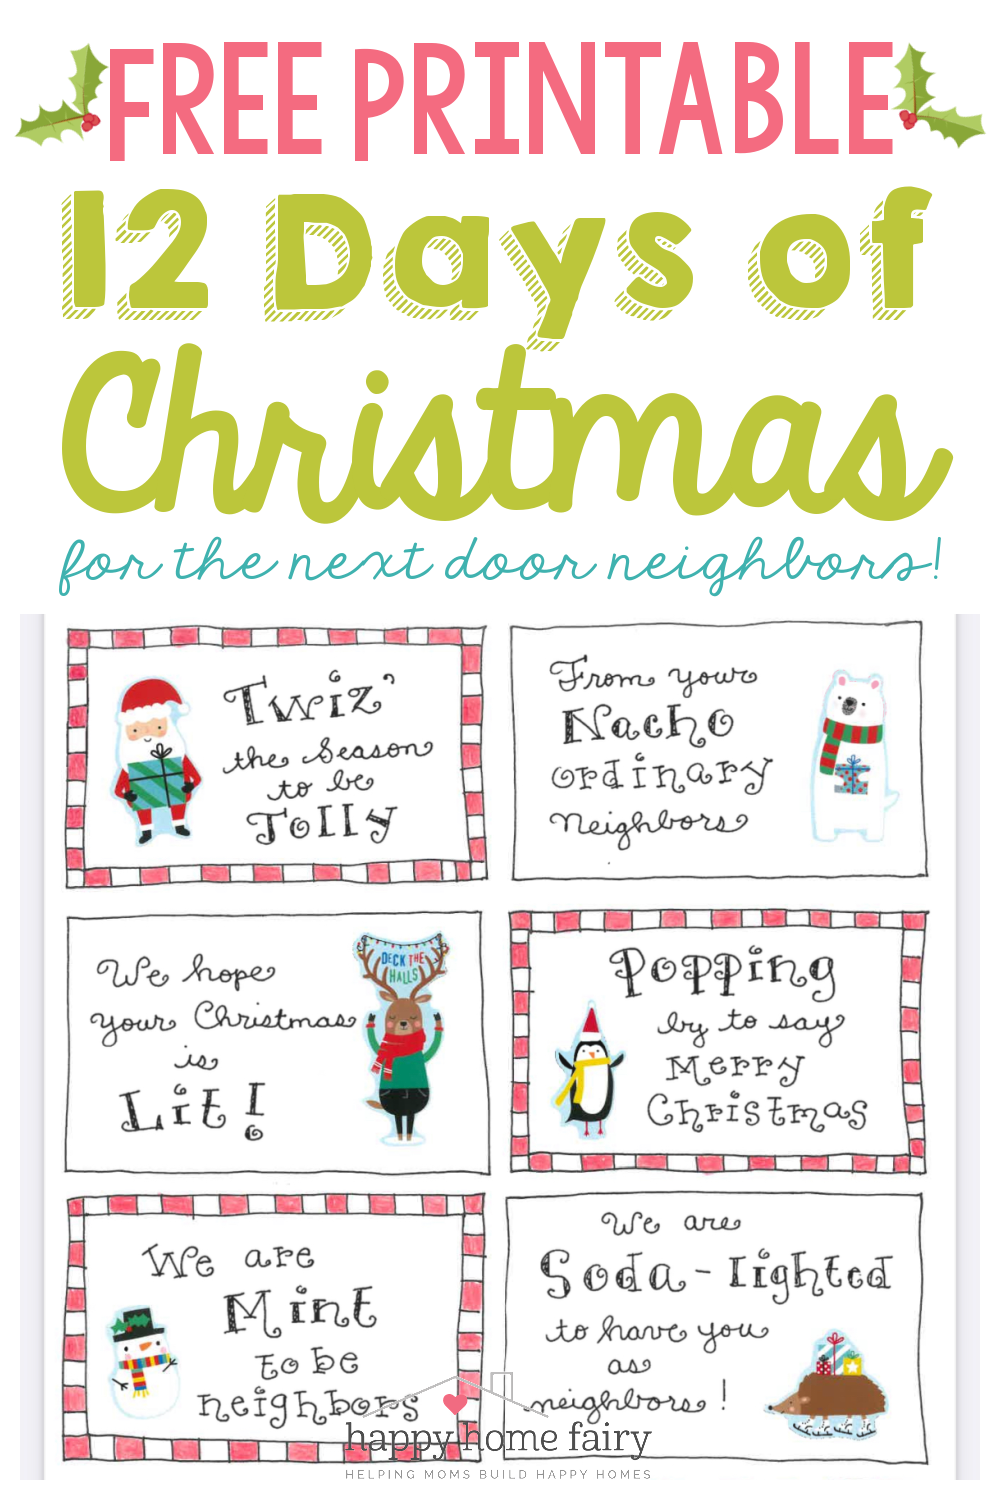 https://happyhomefairy.com/wp-content/uploads/2022/12/12-Days-of-Christmas-for-Neighbors-Free-Printable-at-Happy-Home-Fairy.png